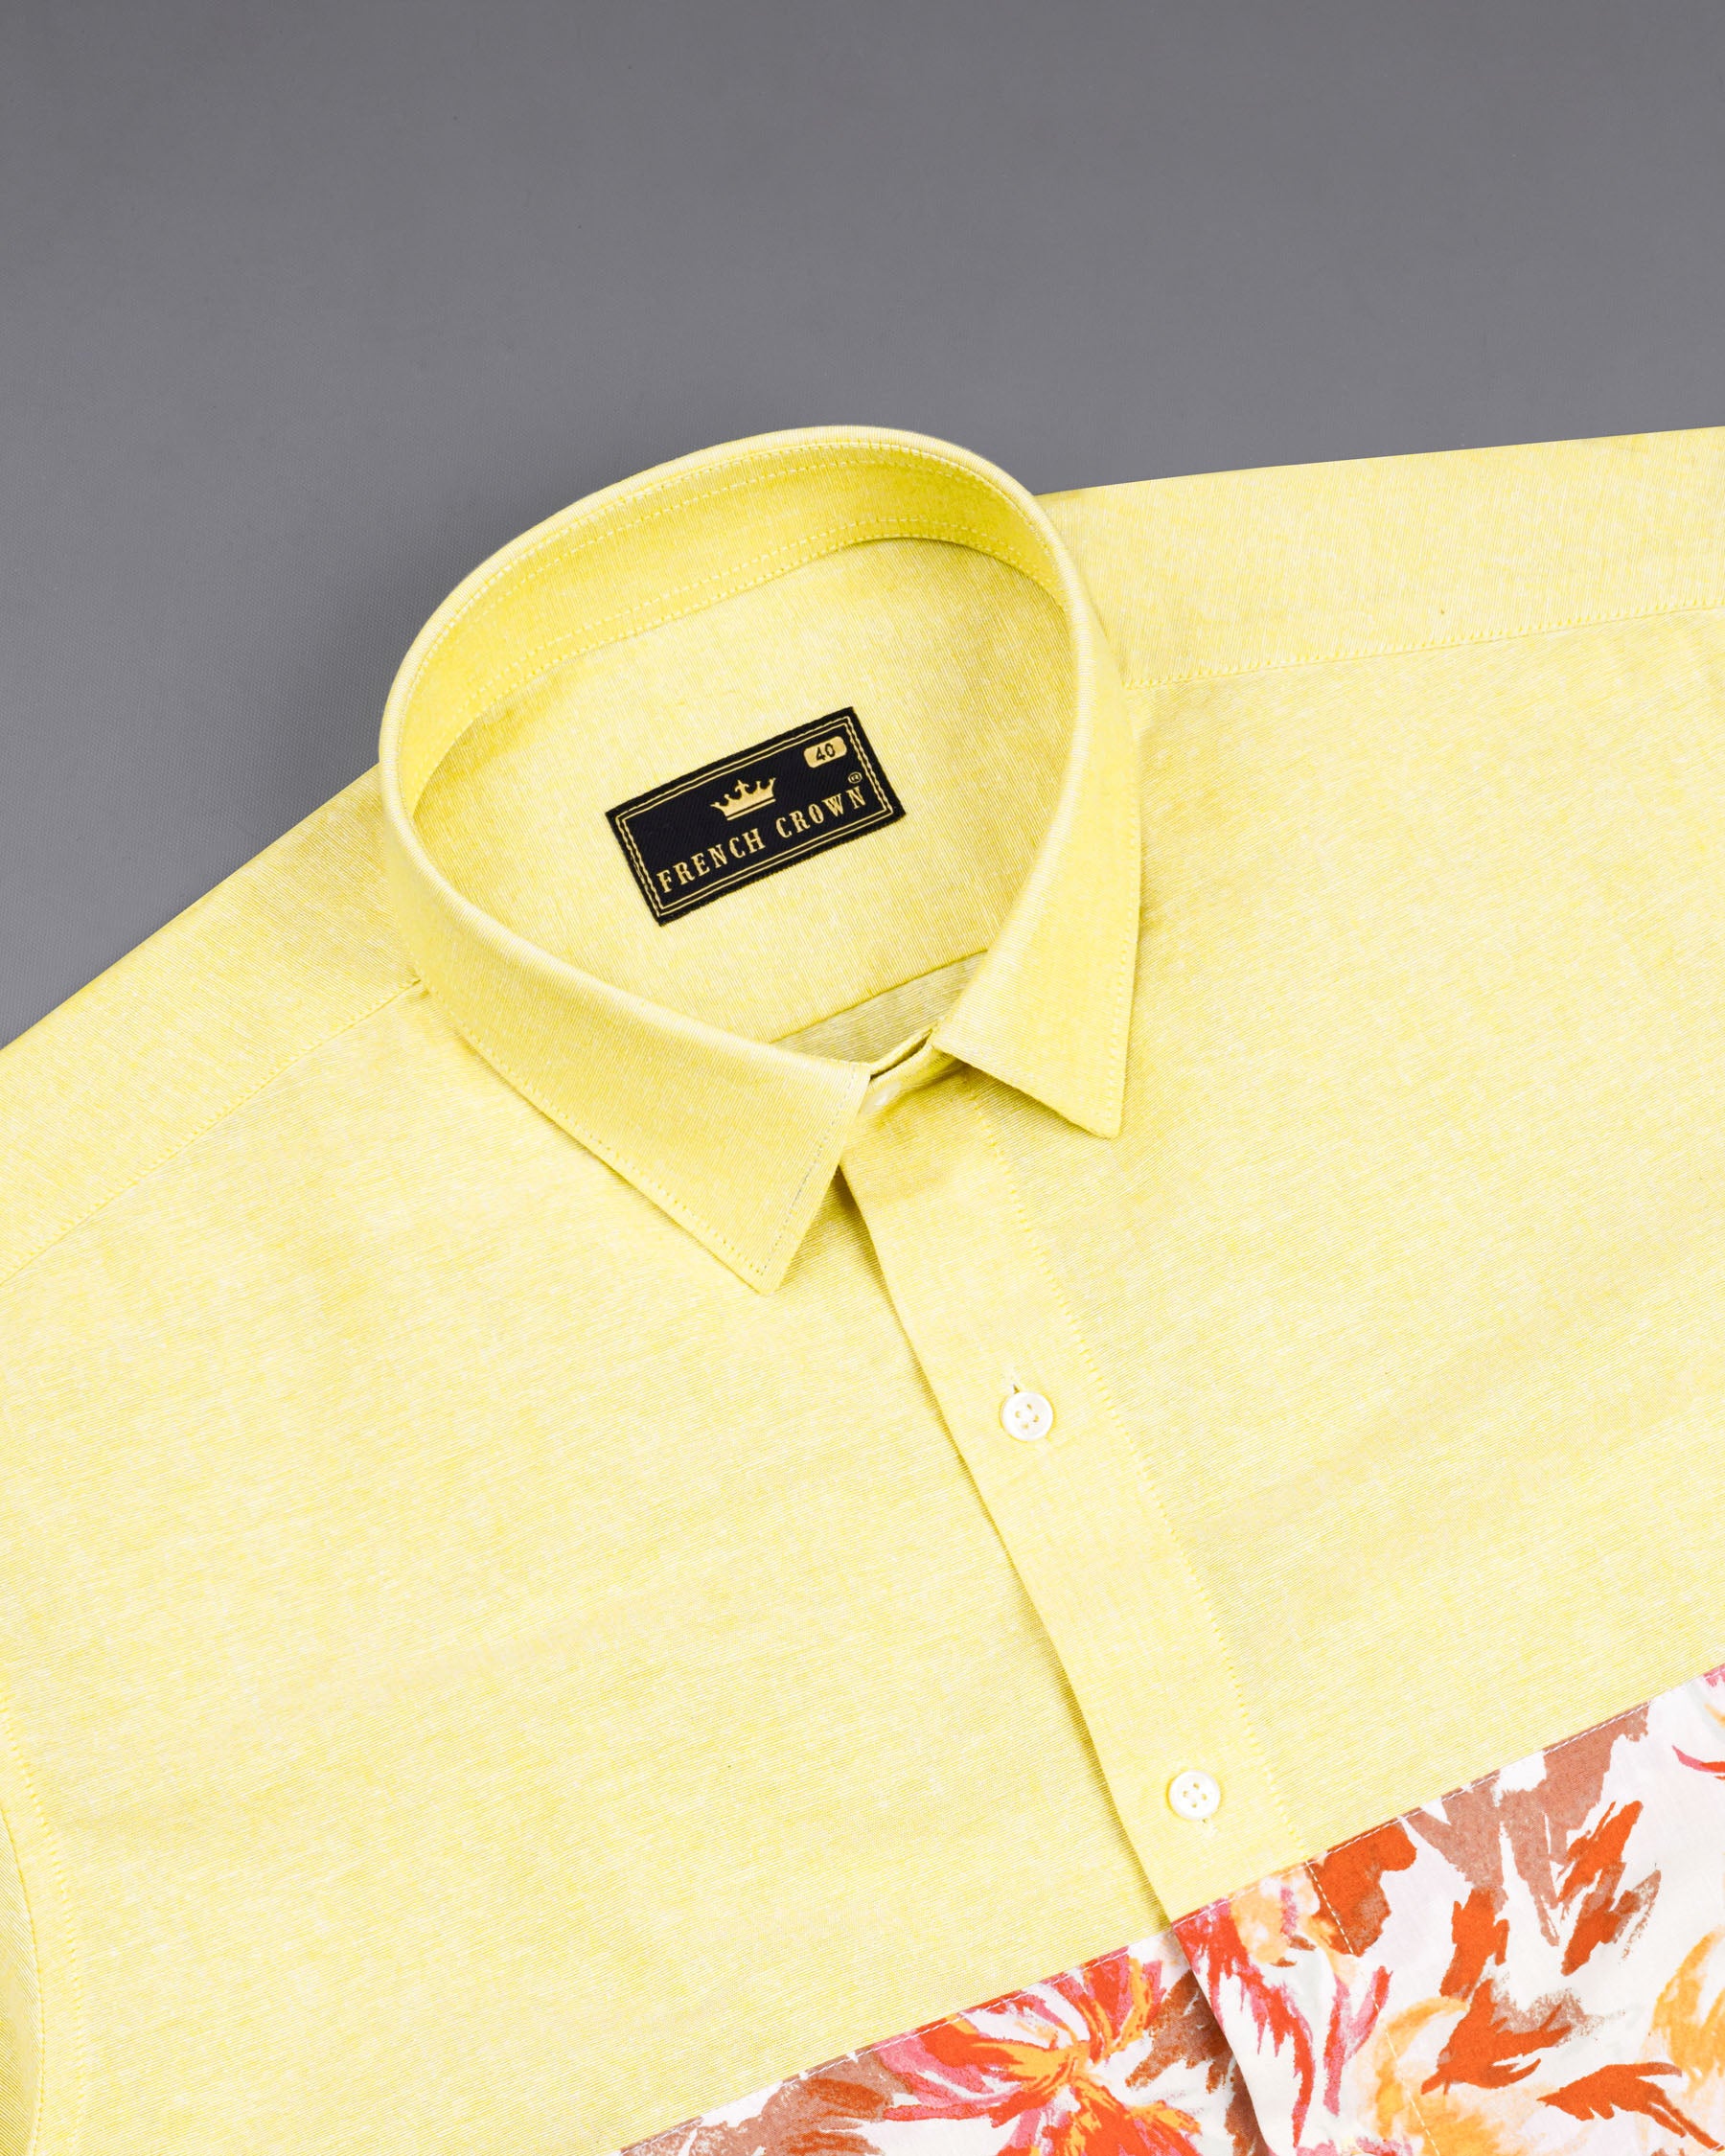 Moccasin Yellow Floral Patched Royal Oxford Designer Shirt 7695-P213-38, 7695-P213-H-38, 7695-P213-39,7695-P213-H-39, 7695-P213-40, 7695-P213-H-40, 7695-P213-42, 7695-P213-H-42, 7695-P213-44, 7695-P213-H-44, 7695-P213-46, 7695-P213-H-46, 7695-P213-48, 7695-P213-H-48, 7695-P213-50, 7695-P213-H-50, 7695-P213-52, 7695-P213-H-52